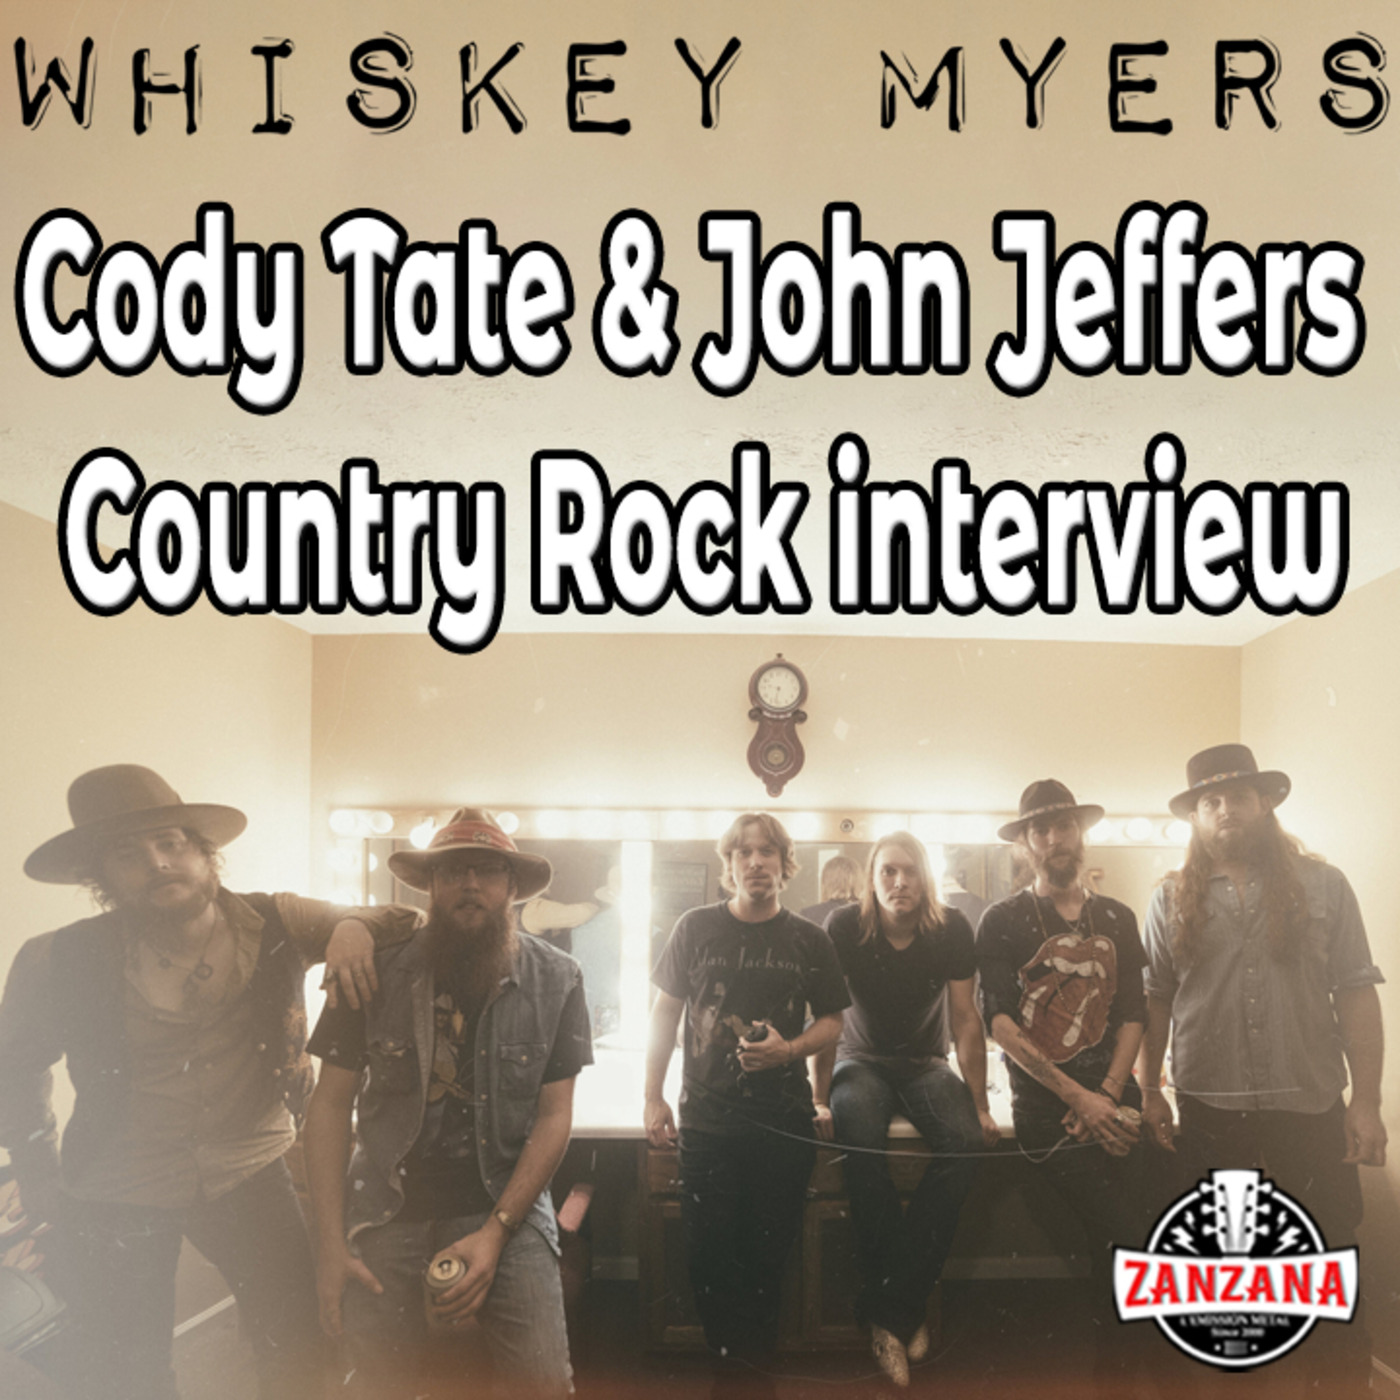 WHISKEY MYERS  Cody Tate & John Jeffers Country Rock Interview